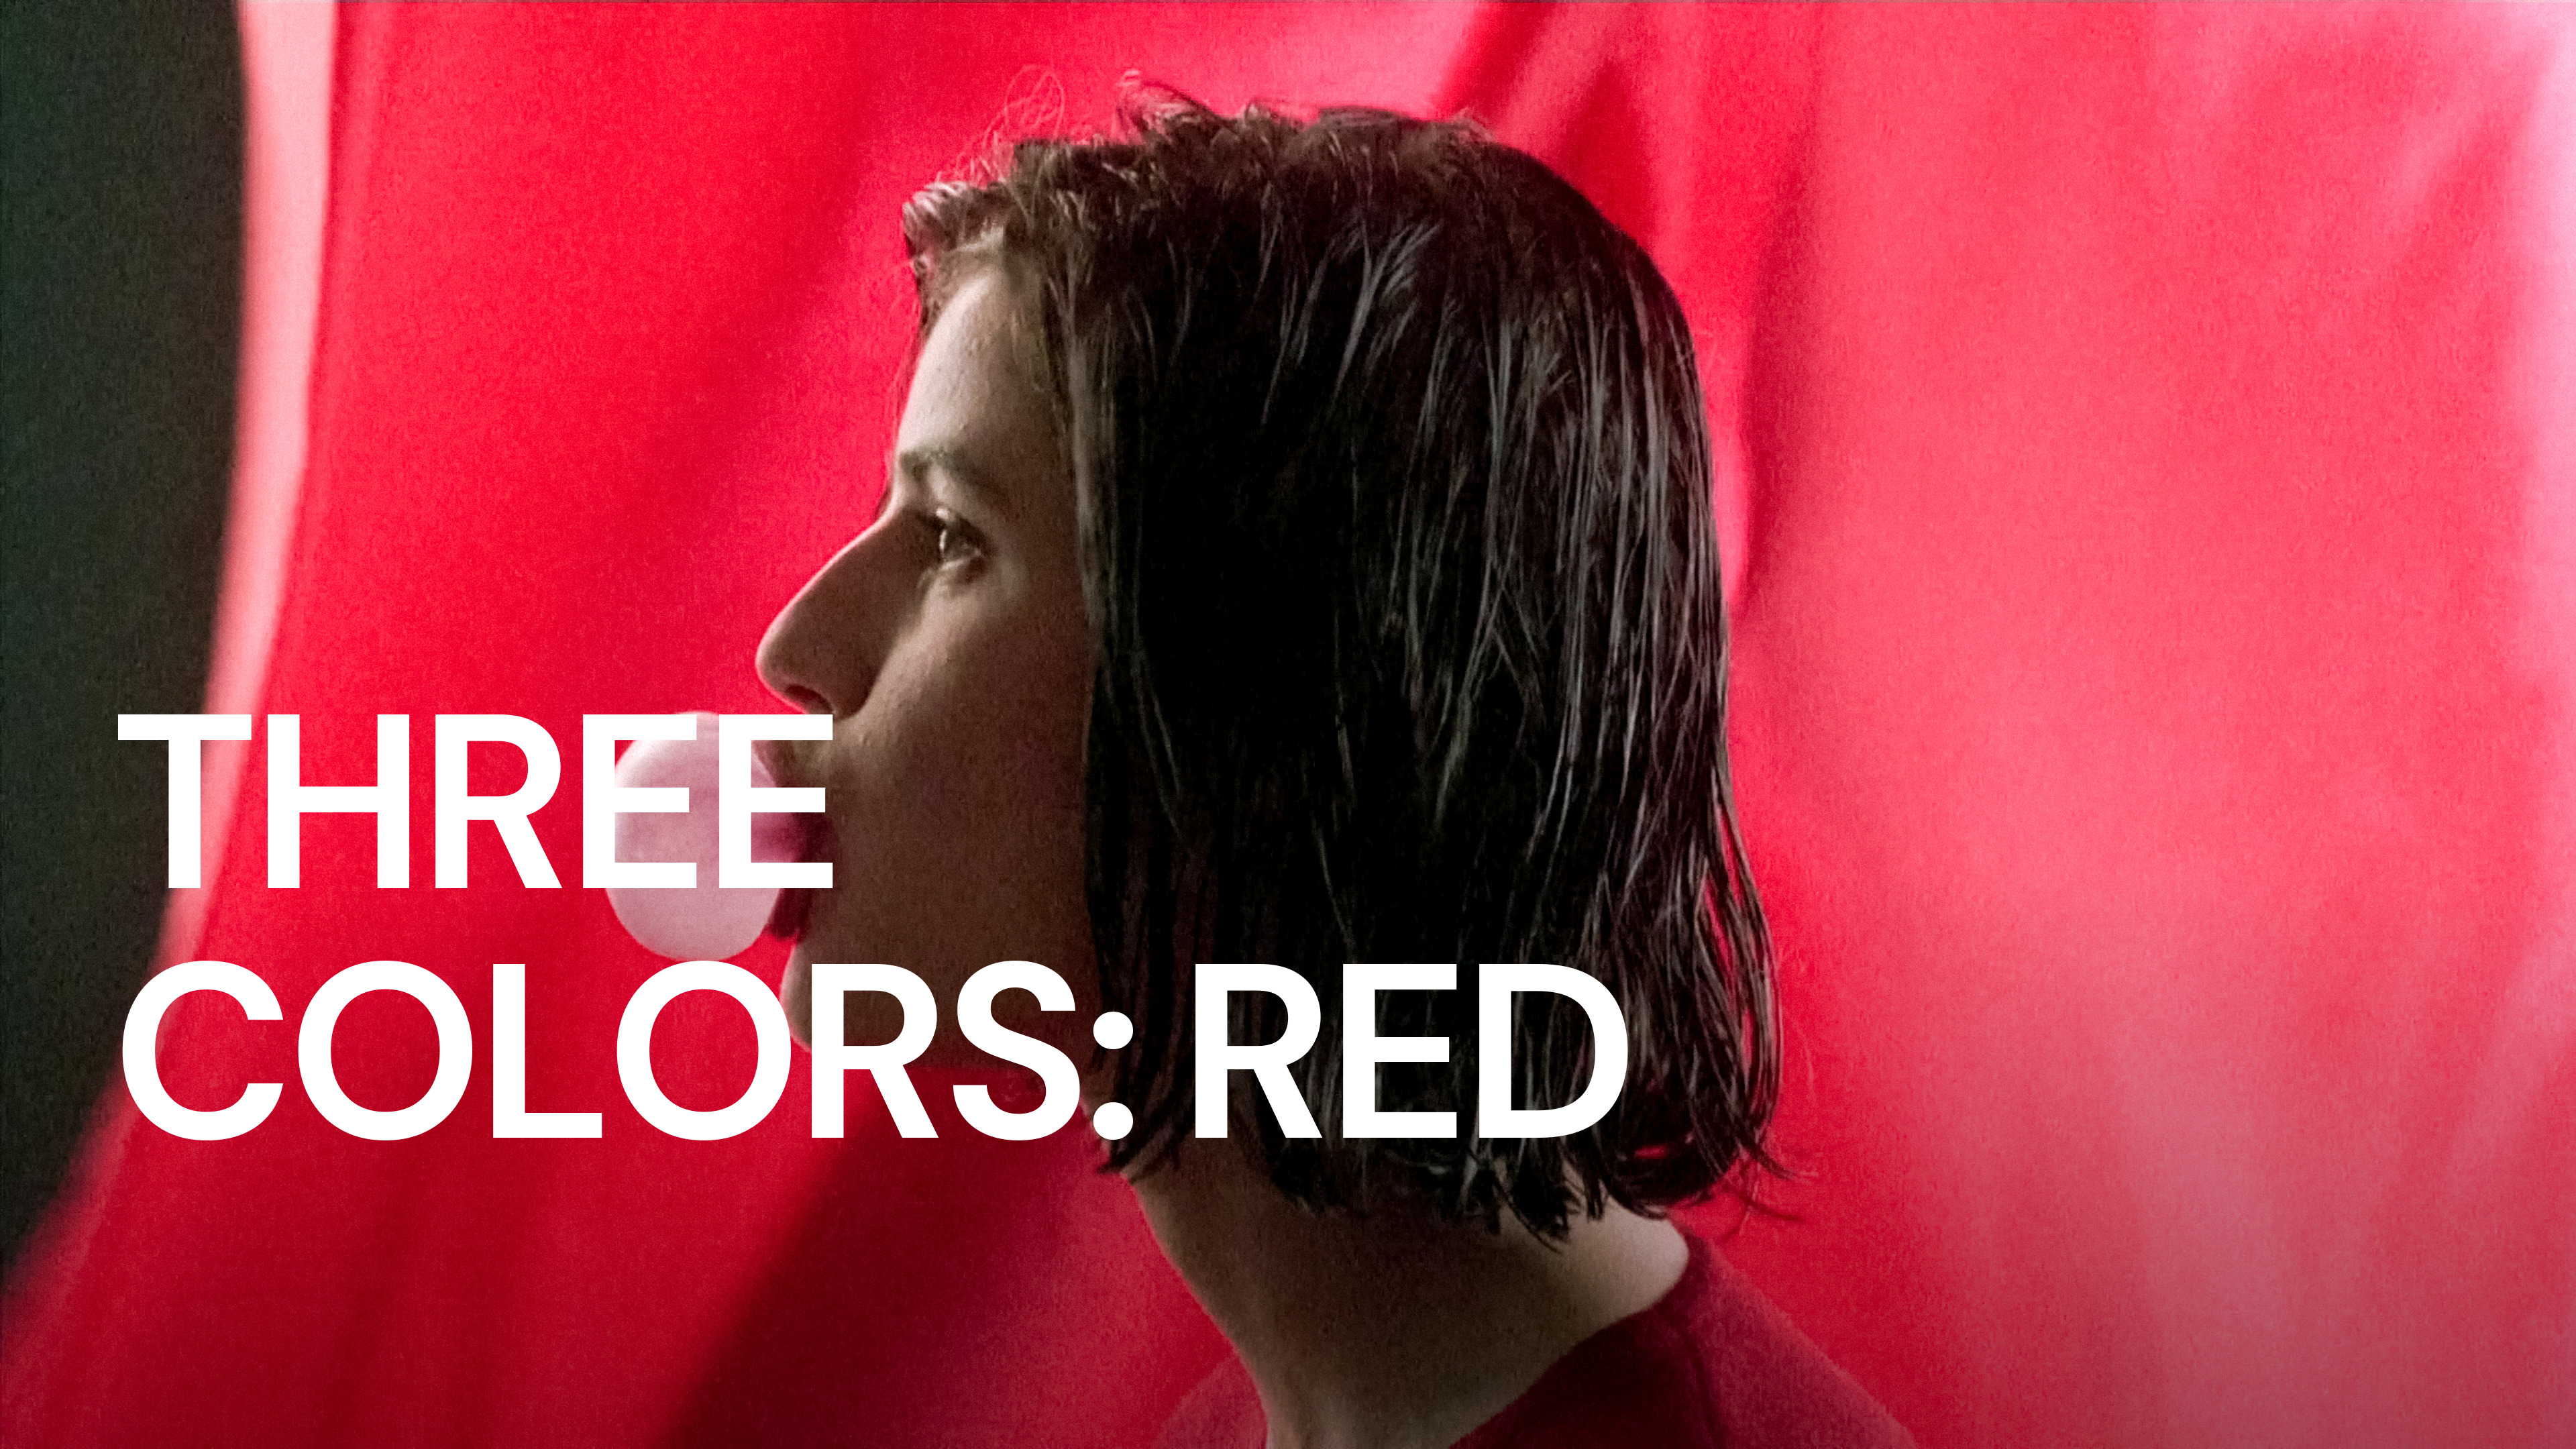 44-facts-about-the-movie-three-colors-red